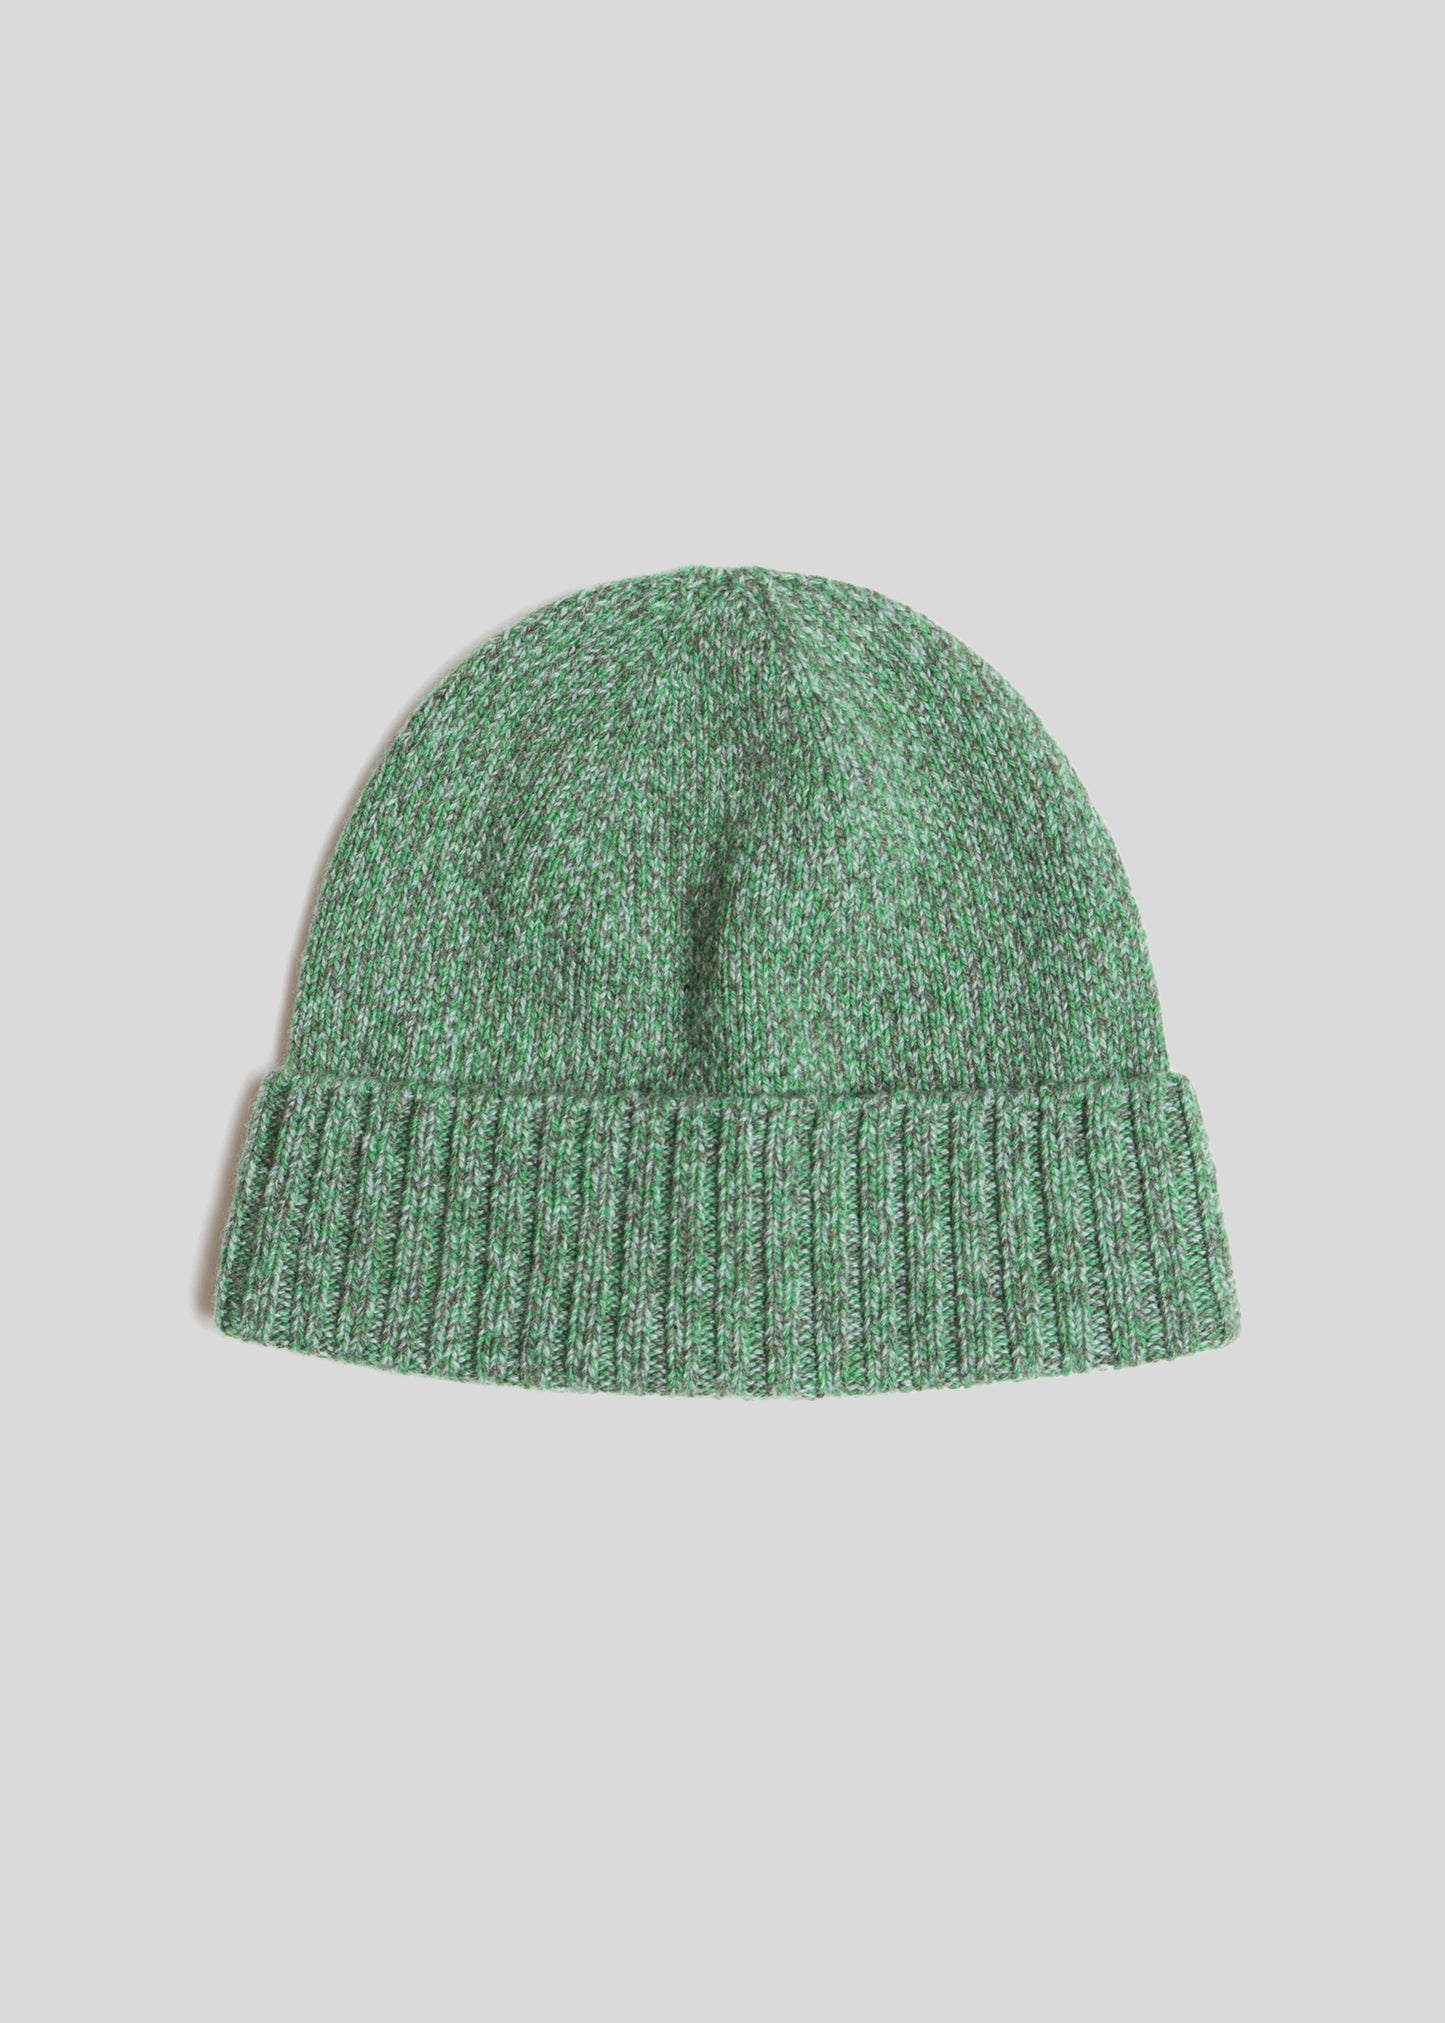 Flat lay of Fisherman Beanie in color spruce